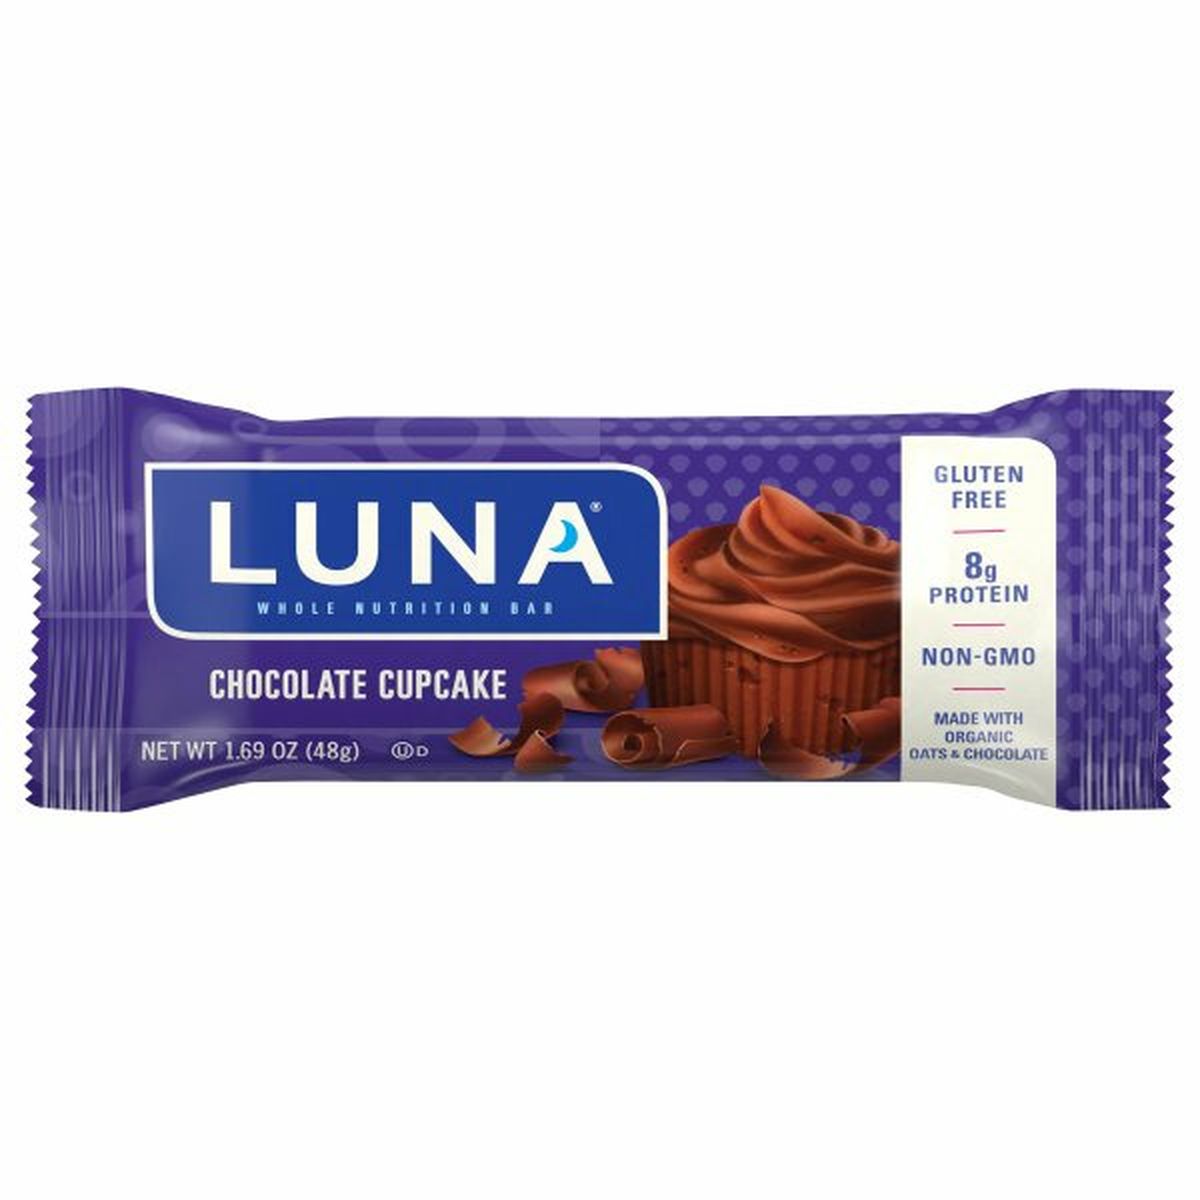 Calories in Luna Whole Nutrition Bar, Chocolate Cupcake